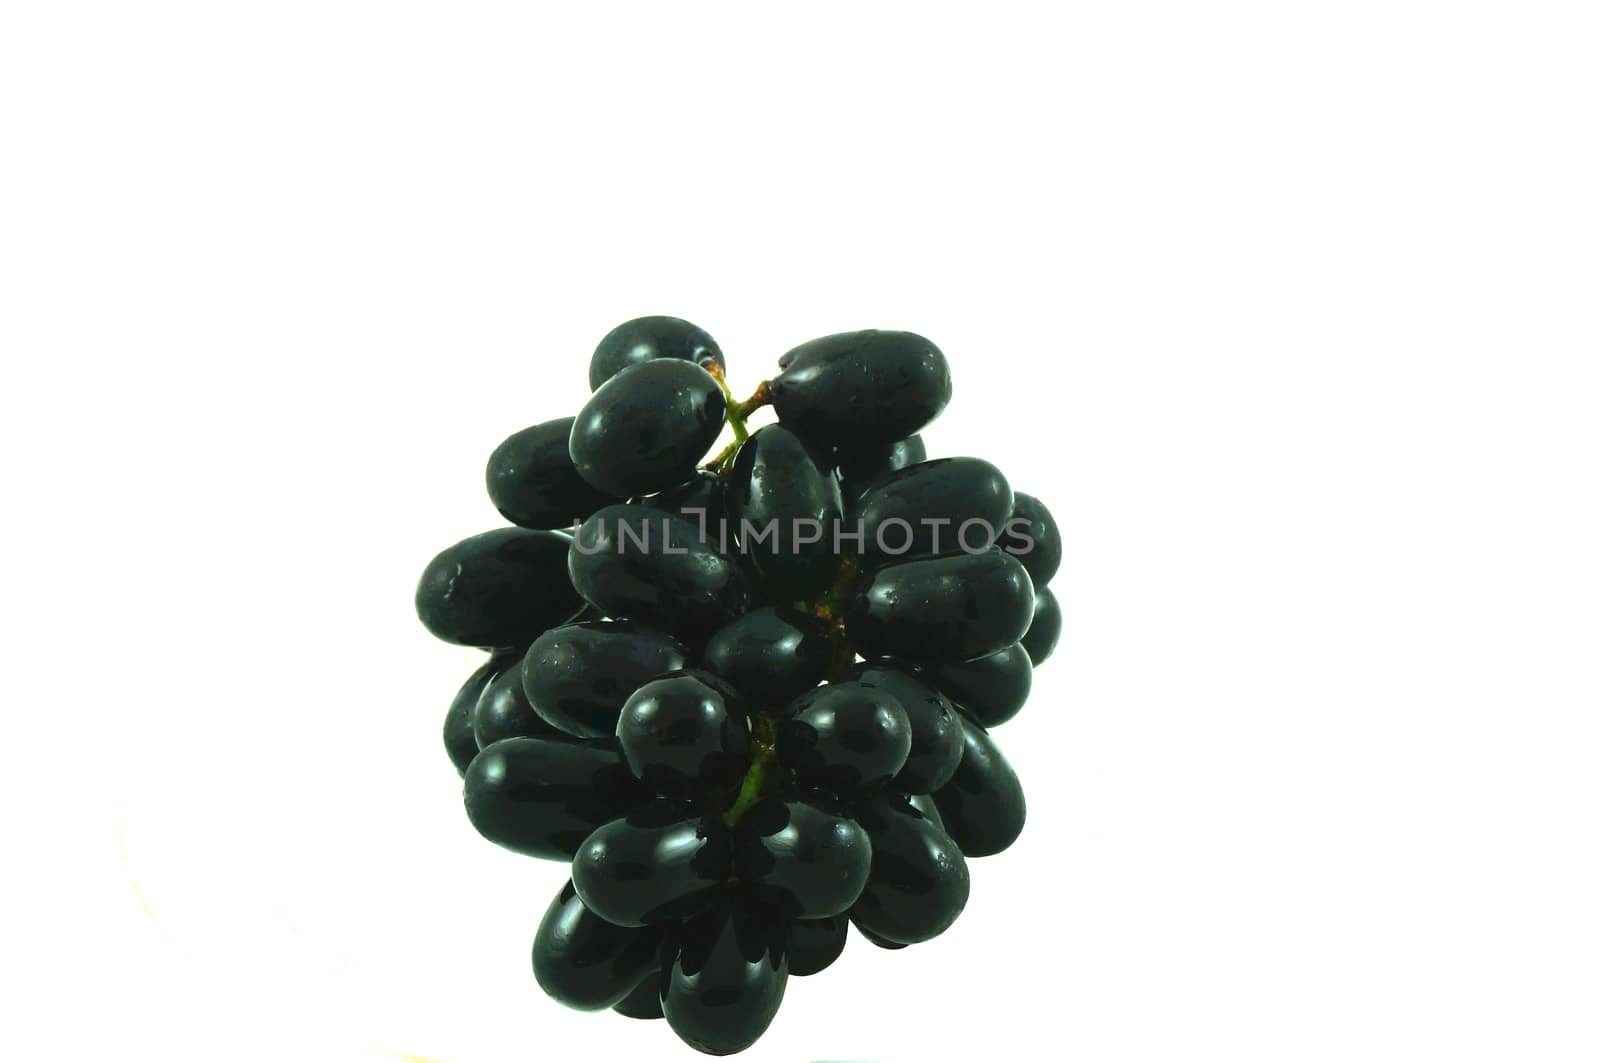 The black grapes on a white background, sorted bushy black naturally.                    